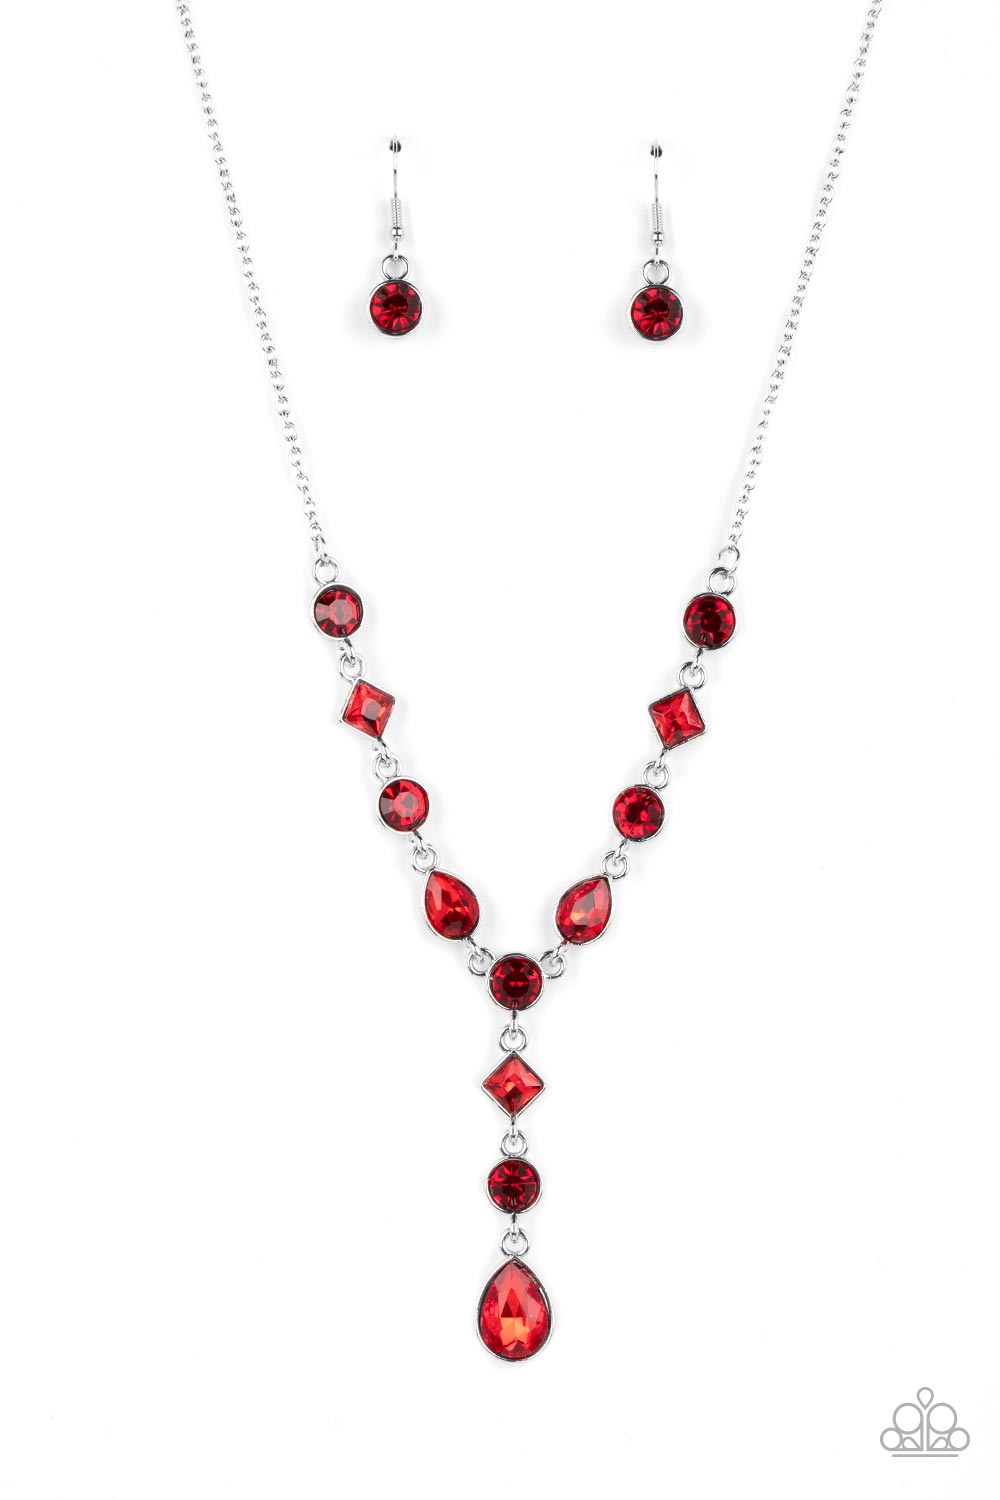 Forget the Crown - Red and Silver Necklace - Paparazzi Accessories - Brilliant red round-cut rhinestones alternate between diamonds and teardrops with a rich red finish, creating an elegant lariat fit for royalty. Features an adjustable clasp closure. Sold as one individual necklace.